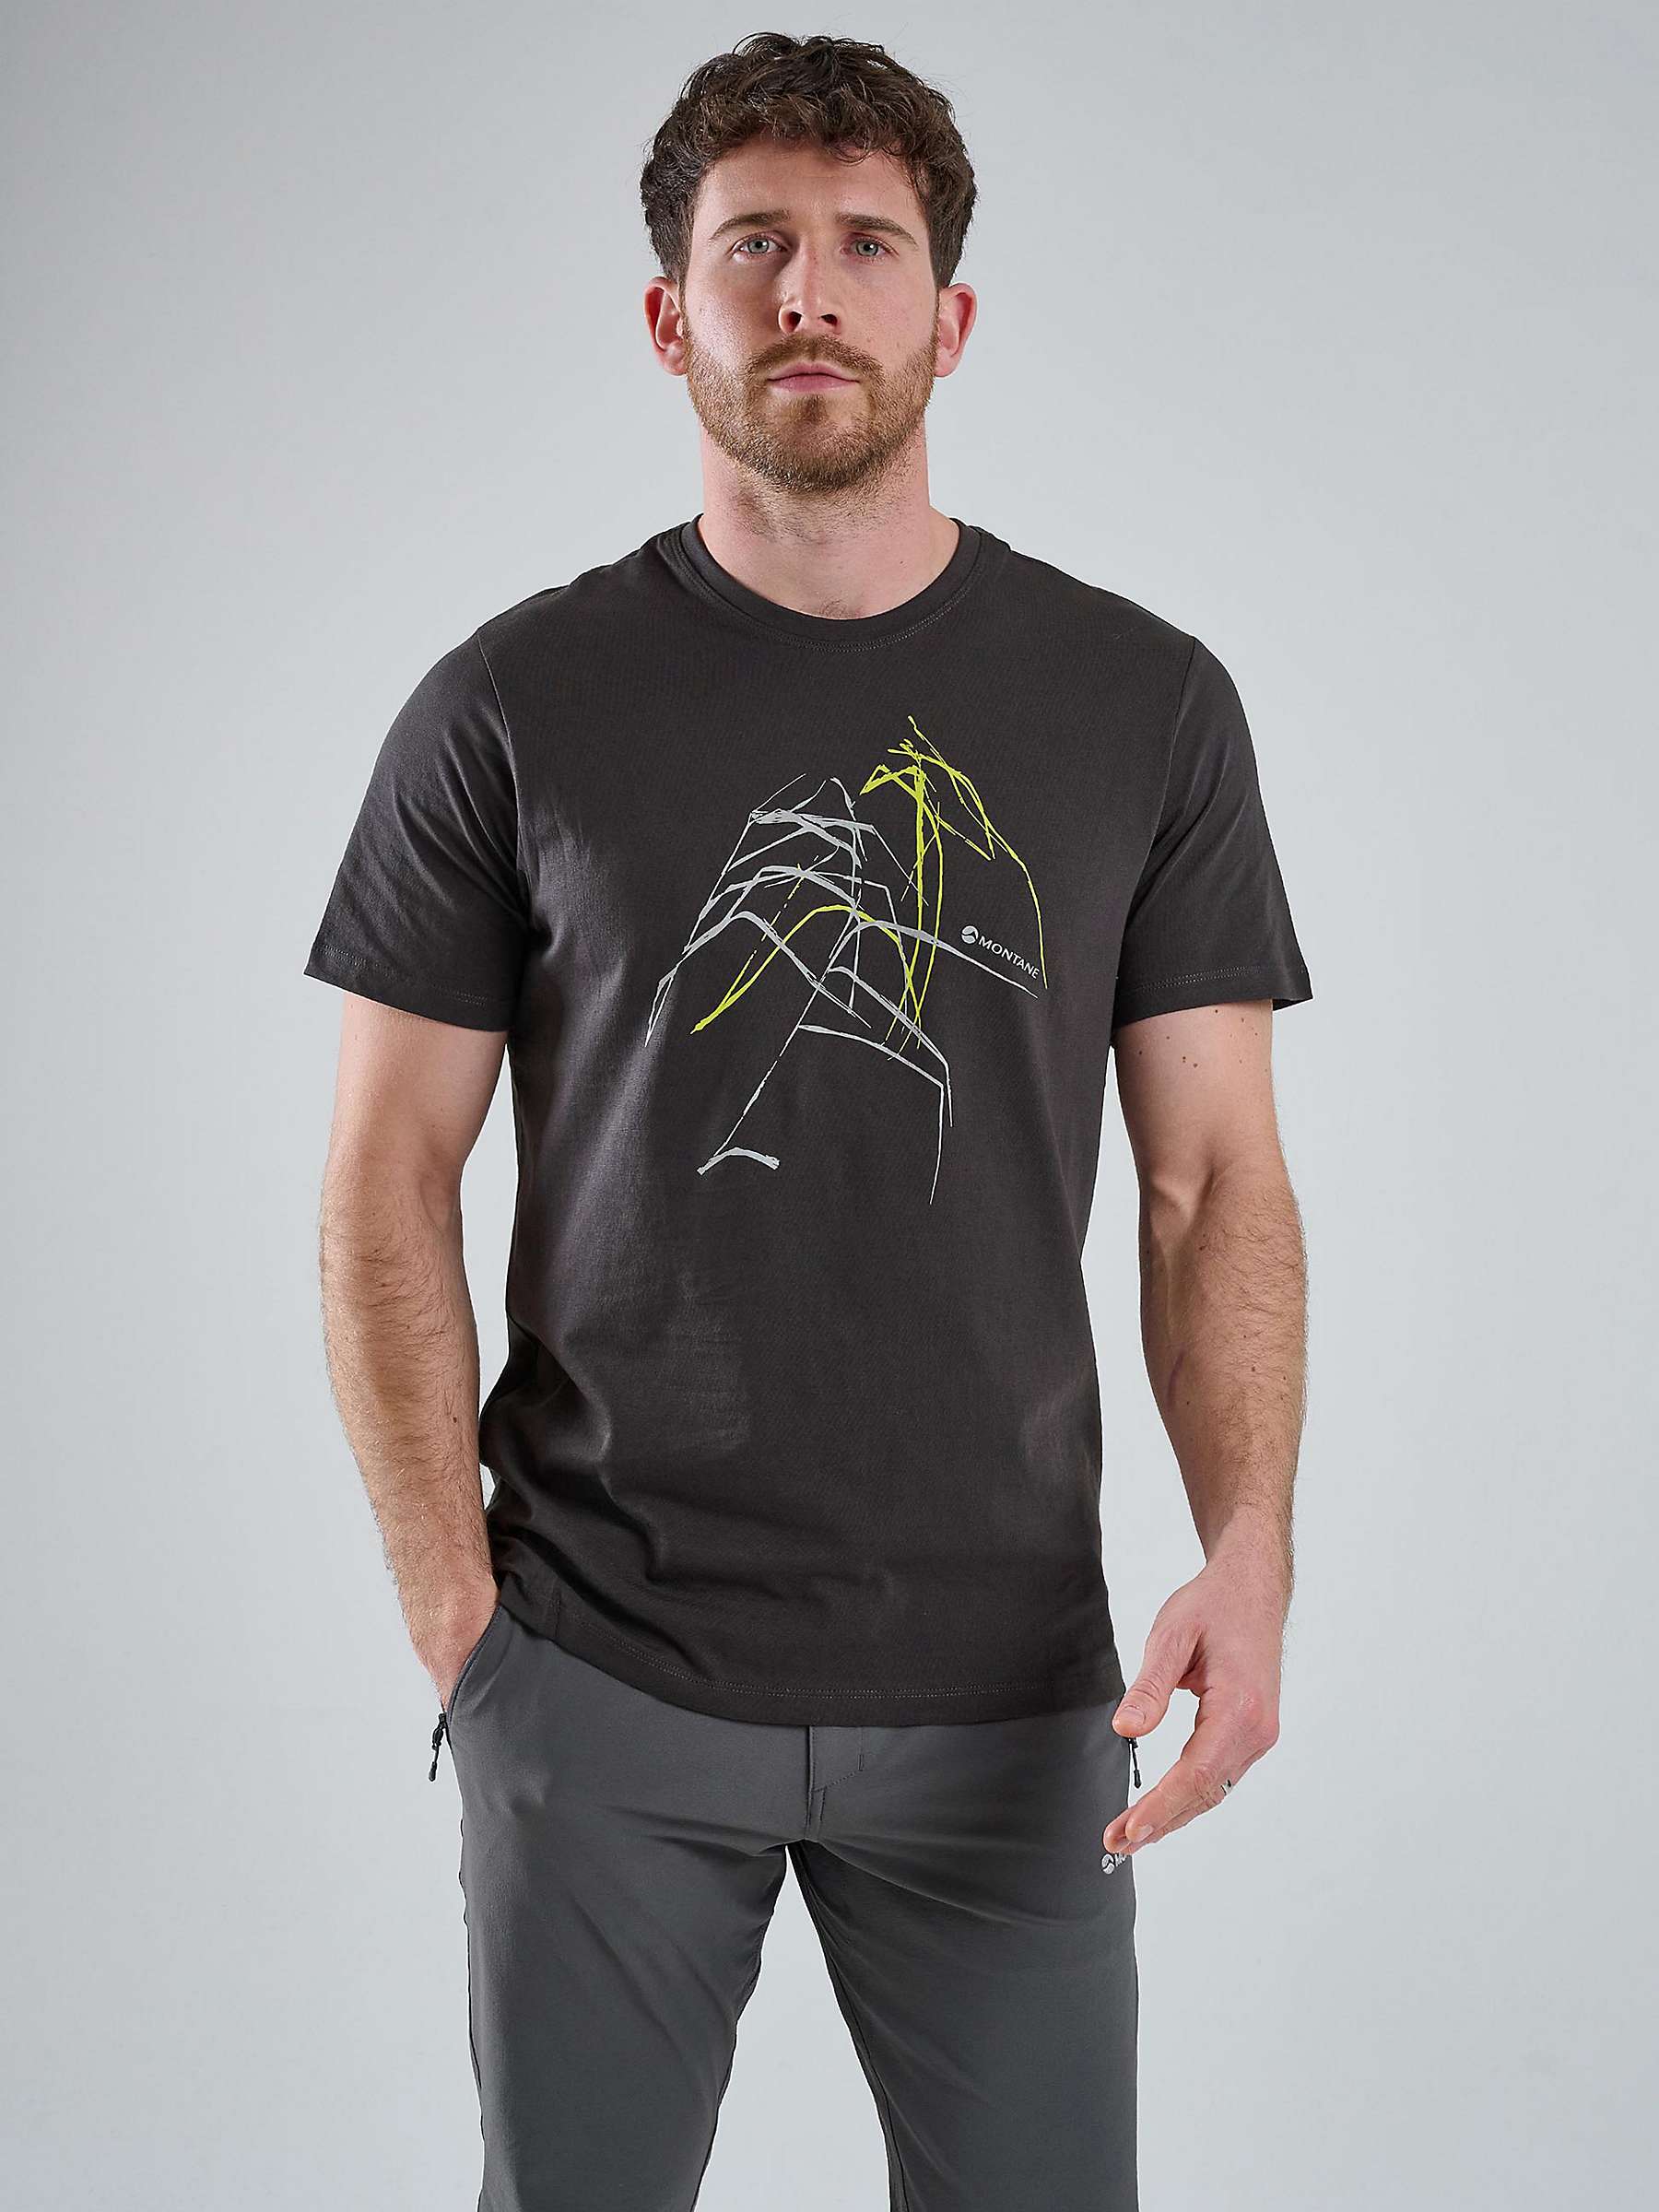 Buy Montane Abstract Mountain Organic Cotton T-Shirt Online at johnlewis.com